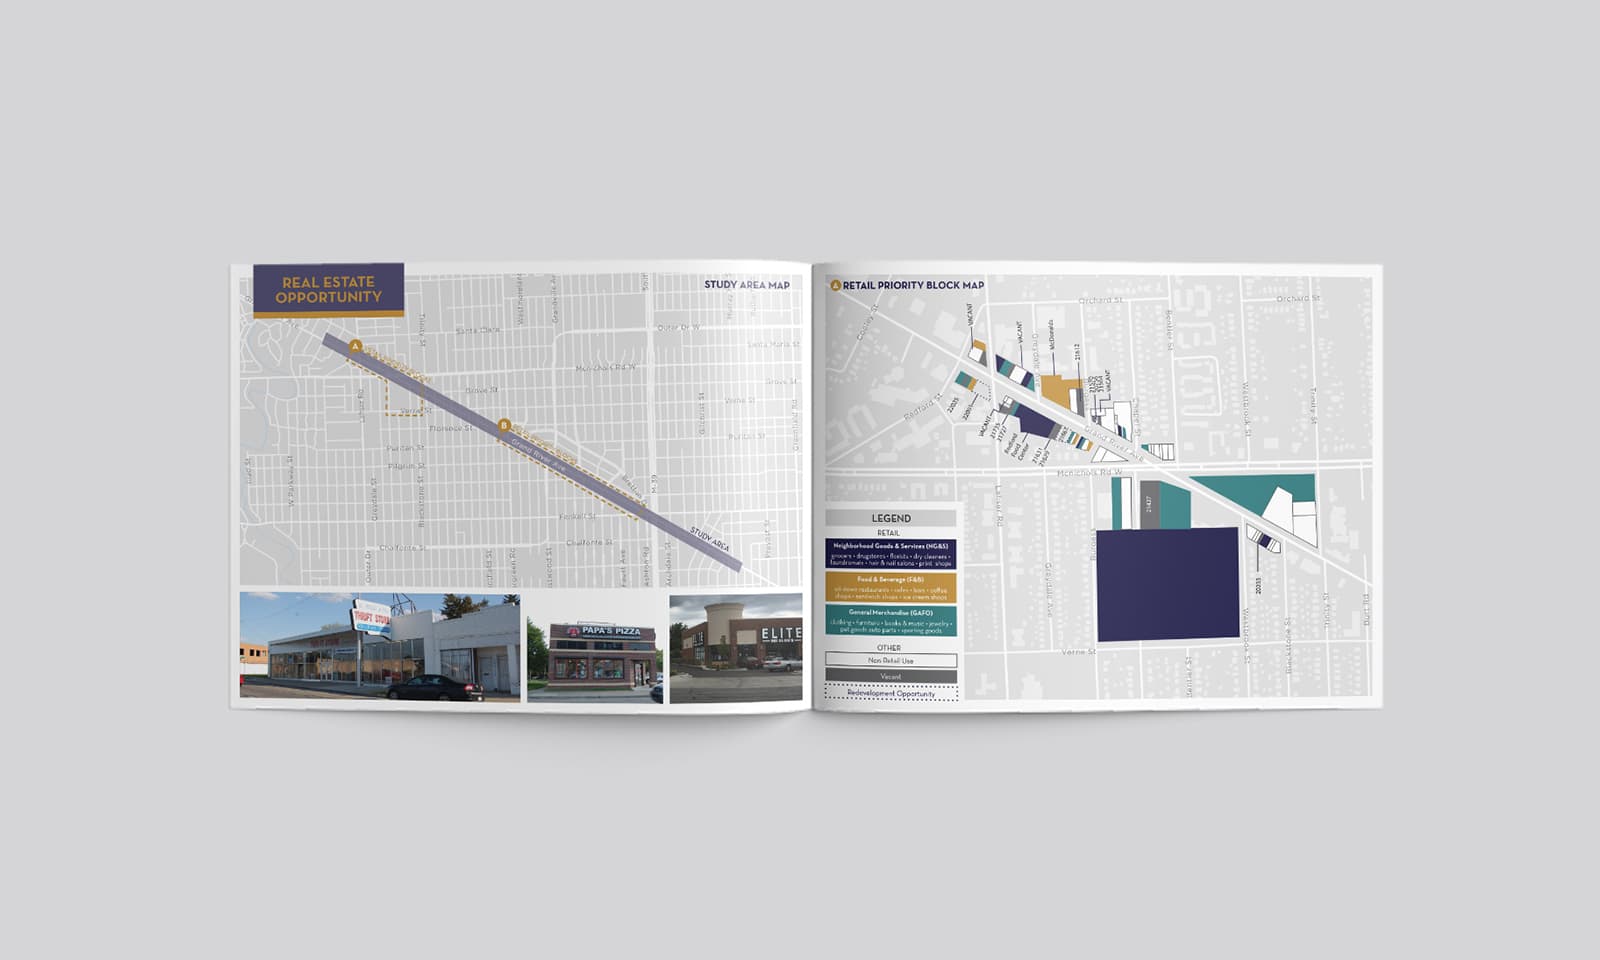 A page view of the Detroit Retail Plan